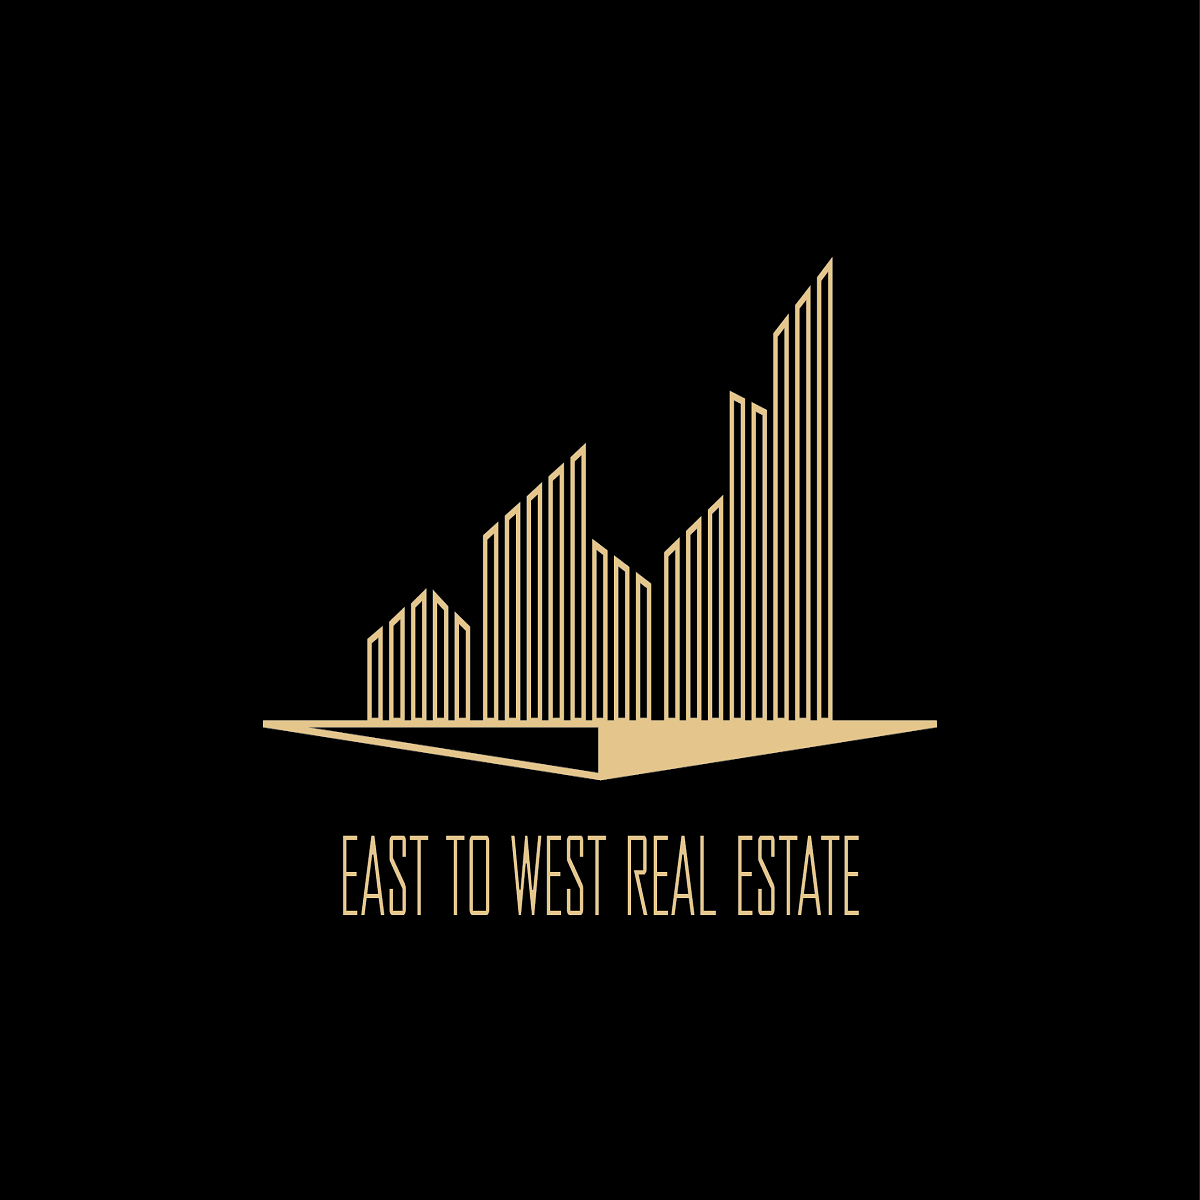 EAST TO WEST REAL ESTATE